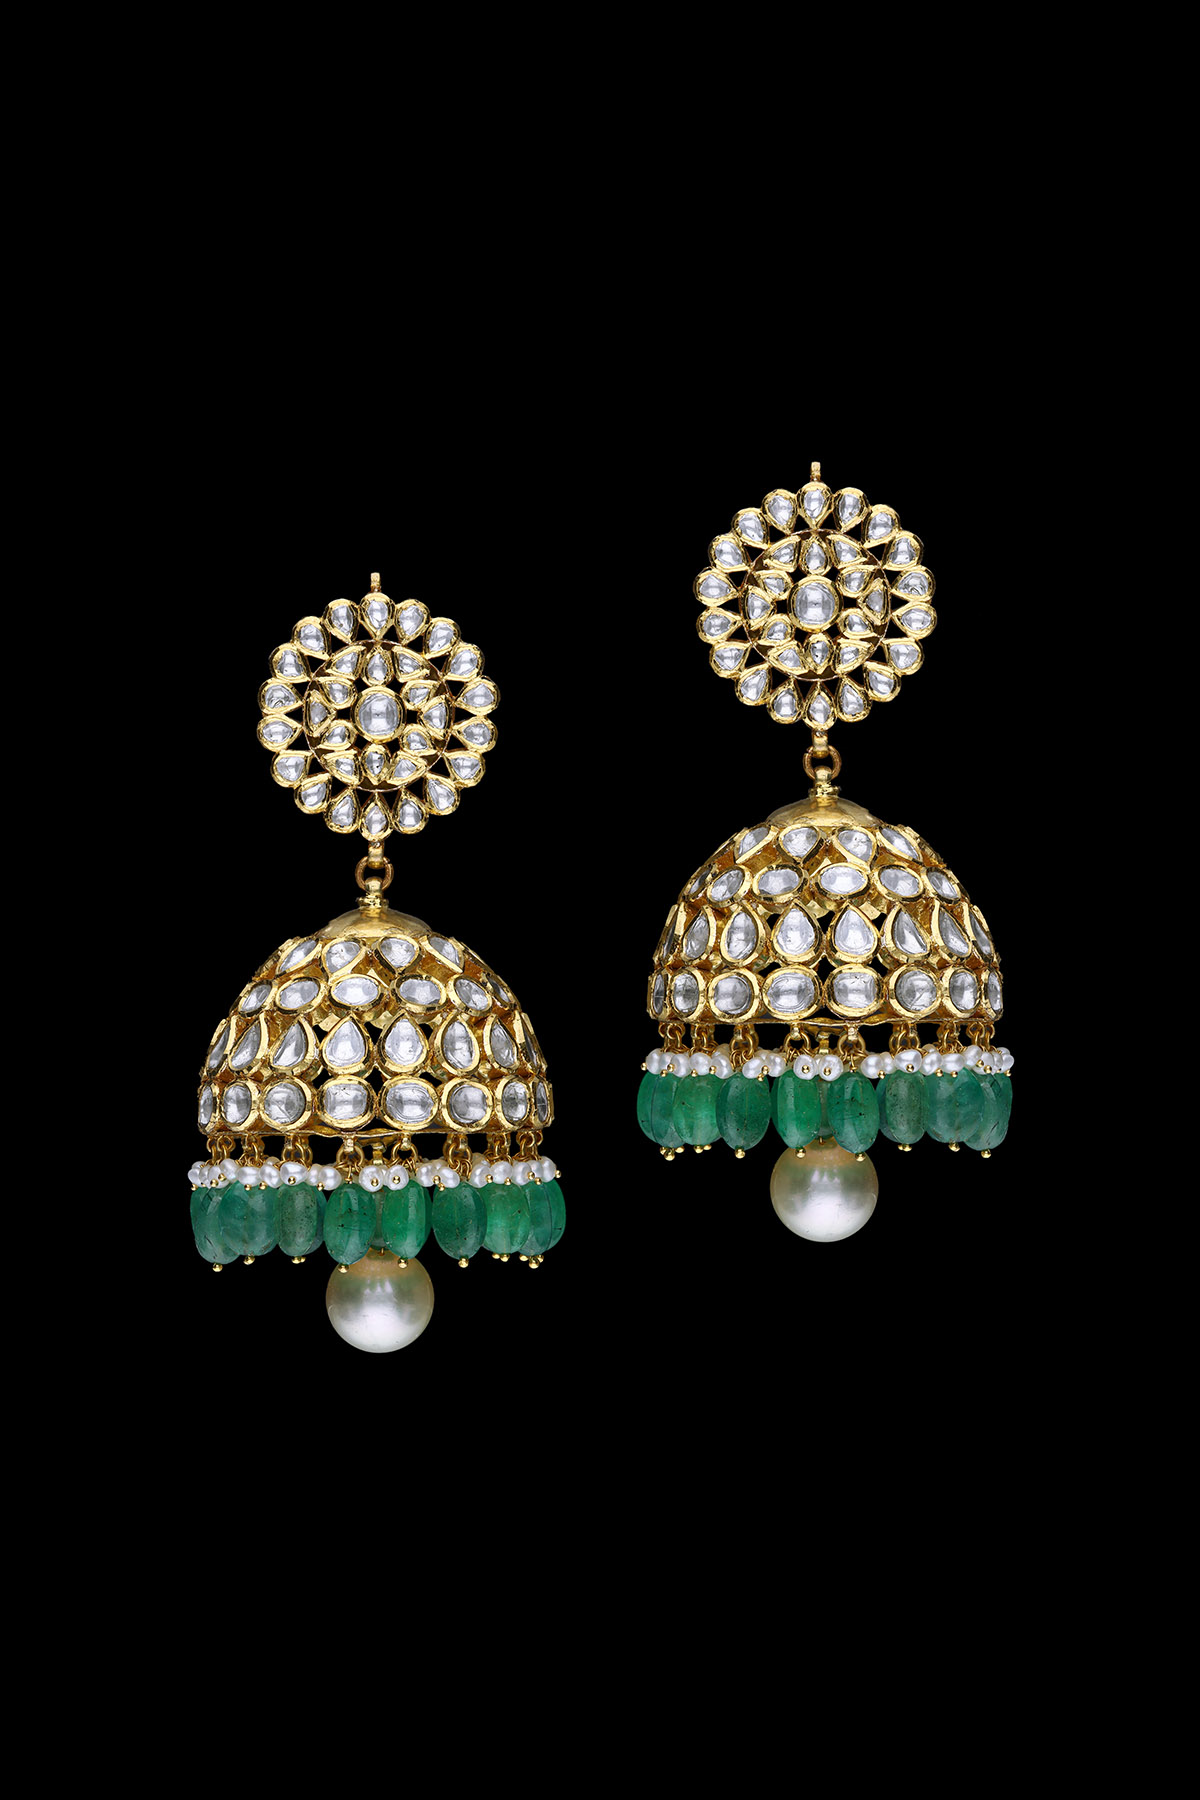 Dassani Brothers Unveils Polki Earrings Collection